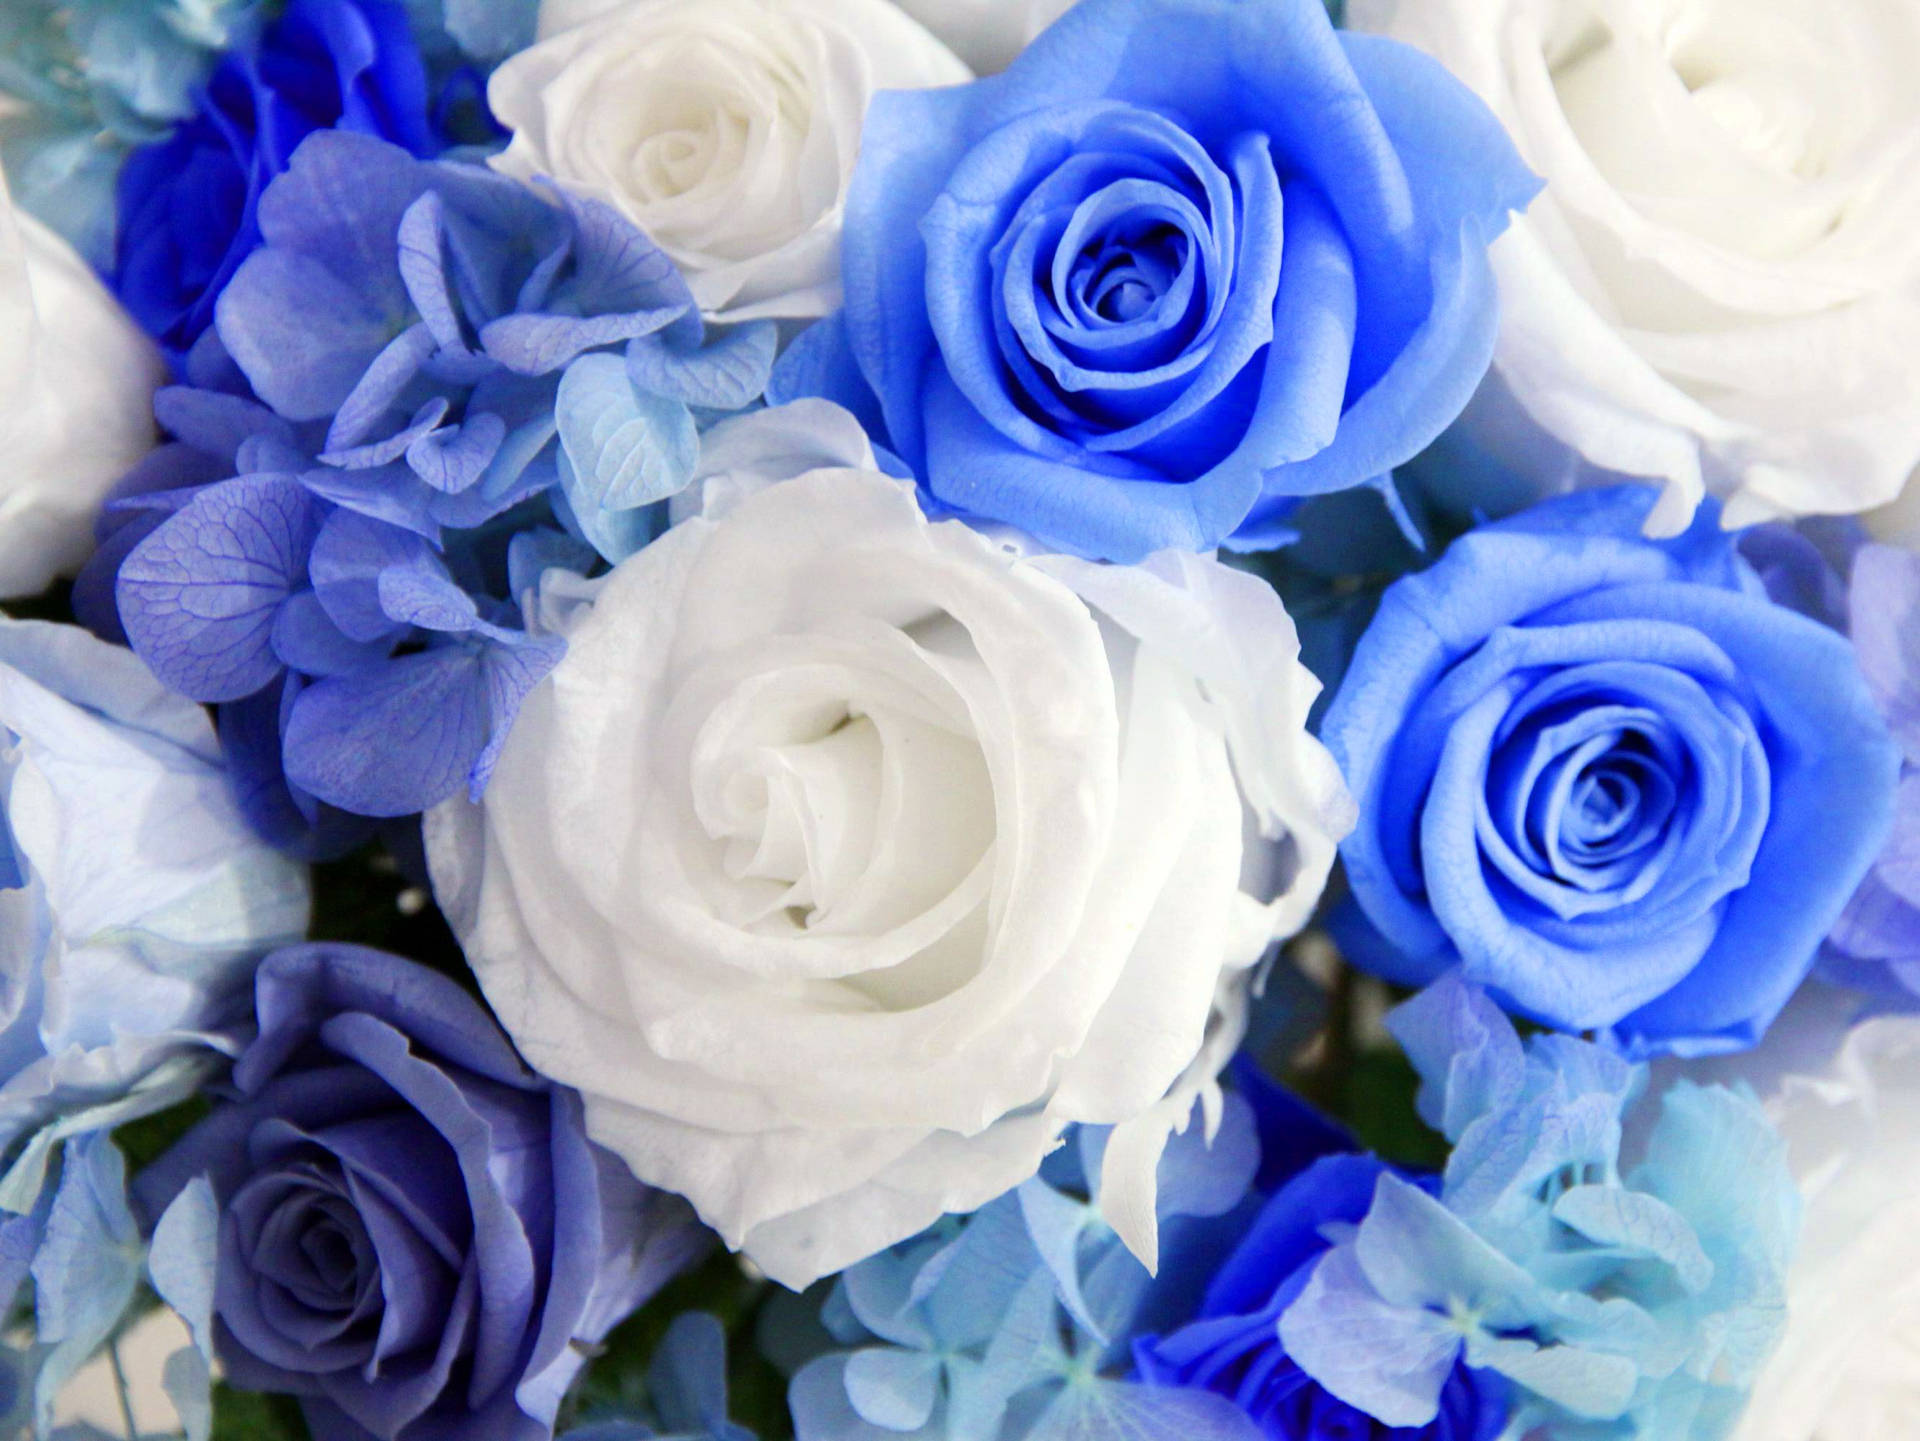 Bundle Of Blue And White Roses Background